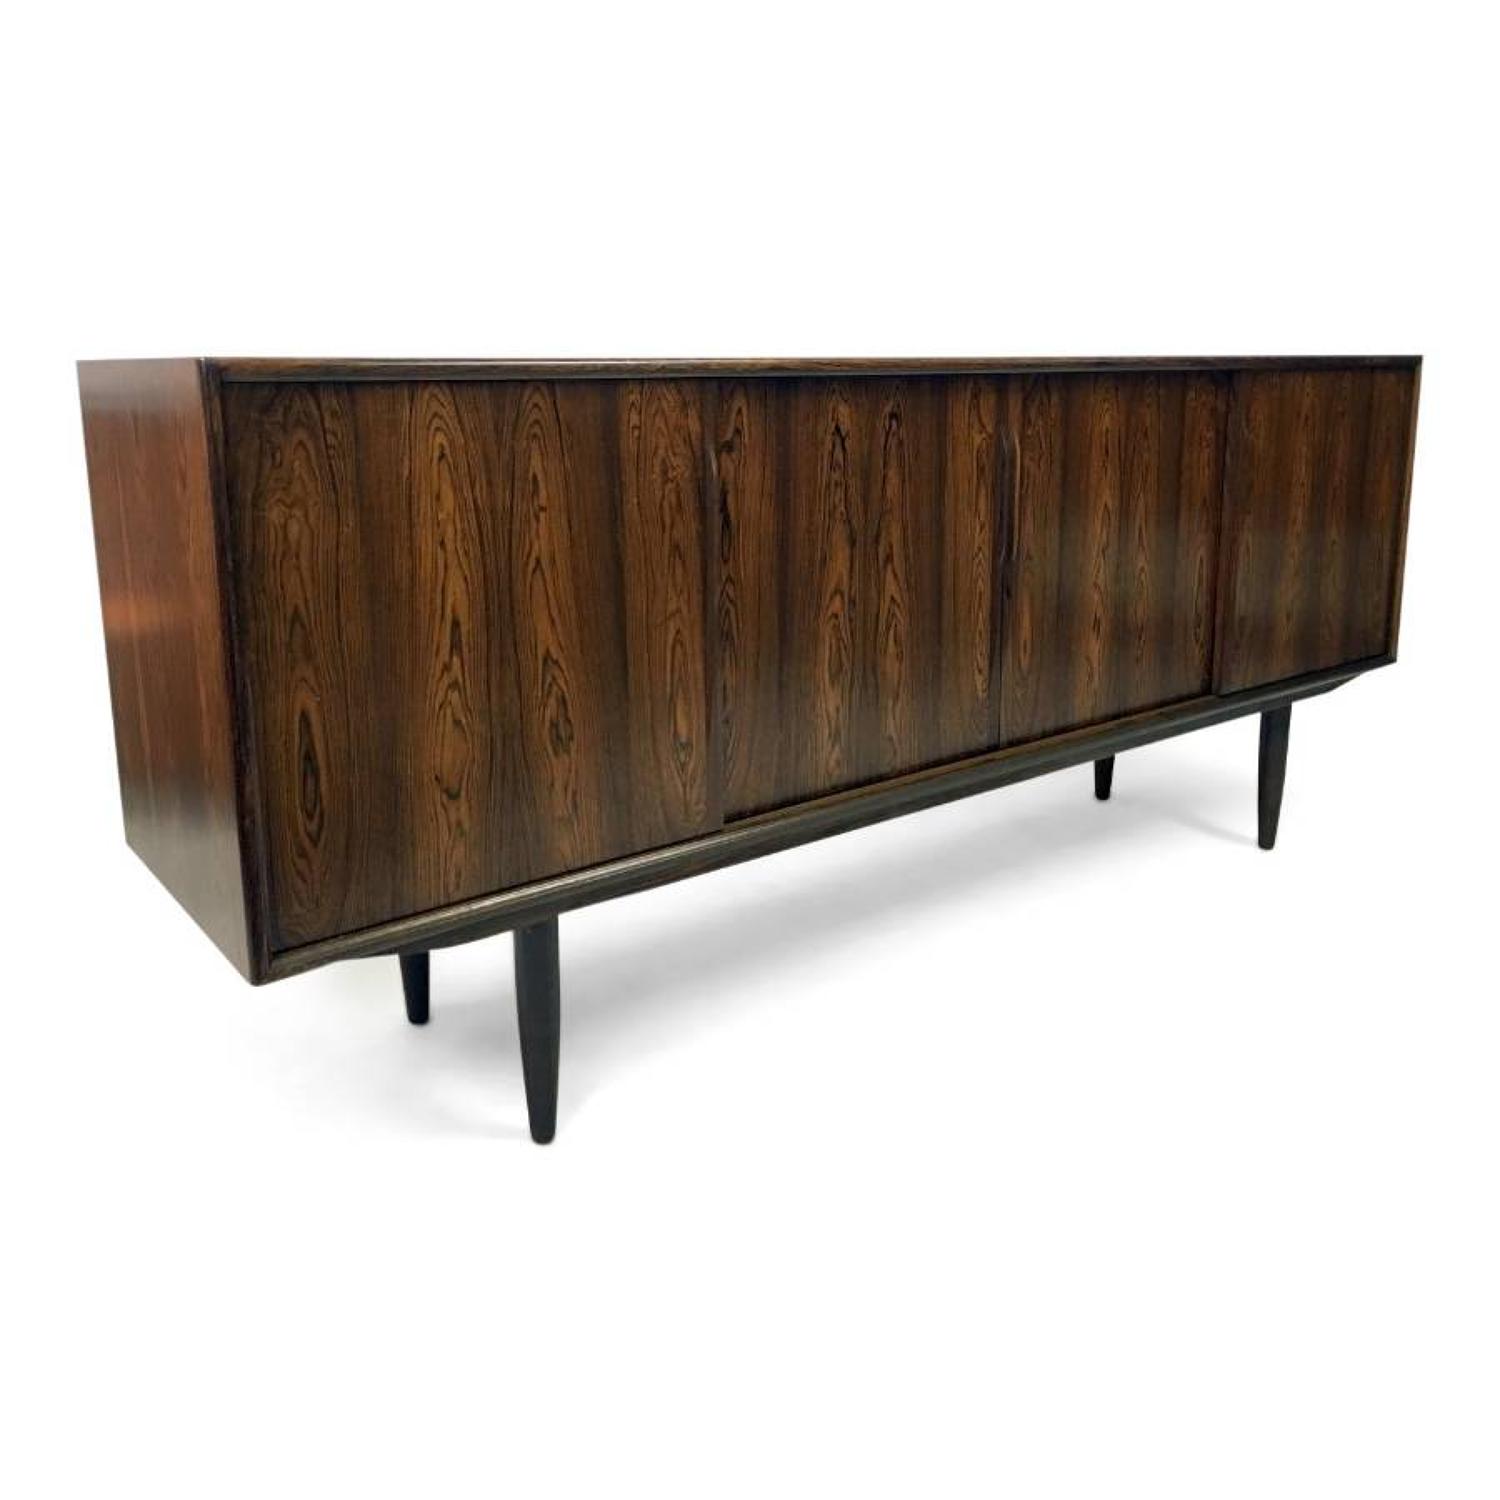 1960s Danish rosewood sideboard by Axel Christensen